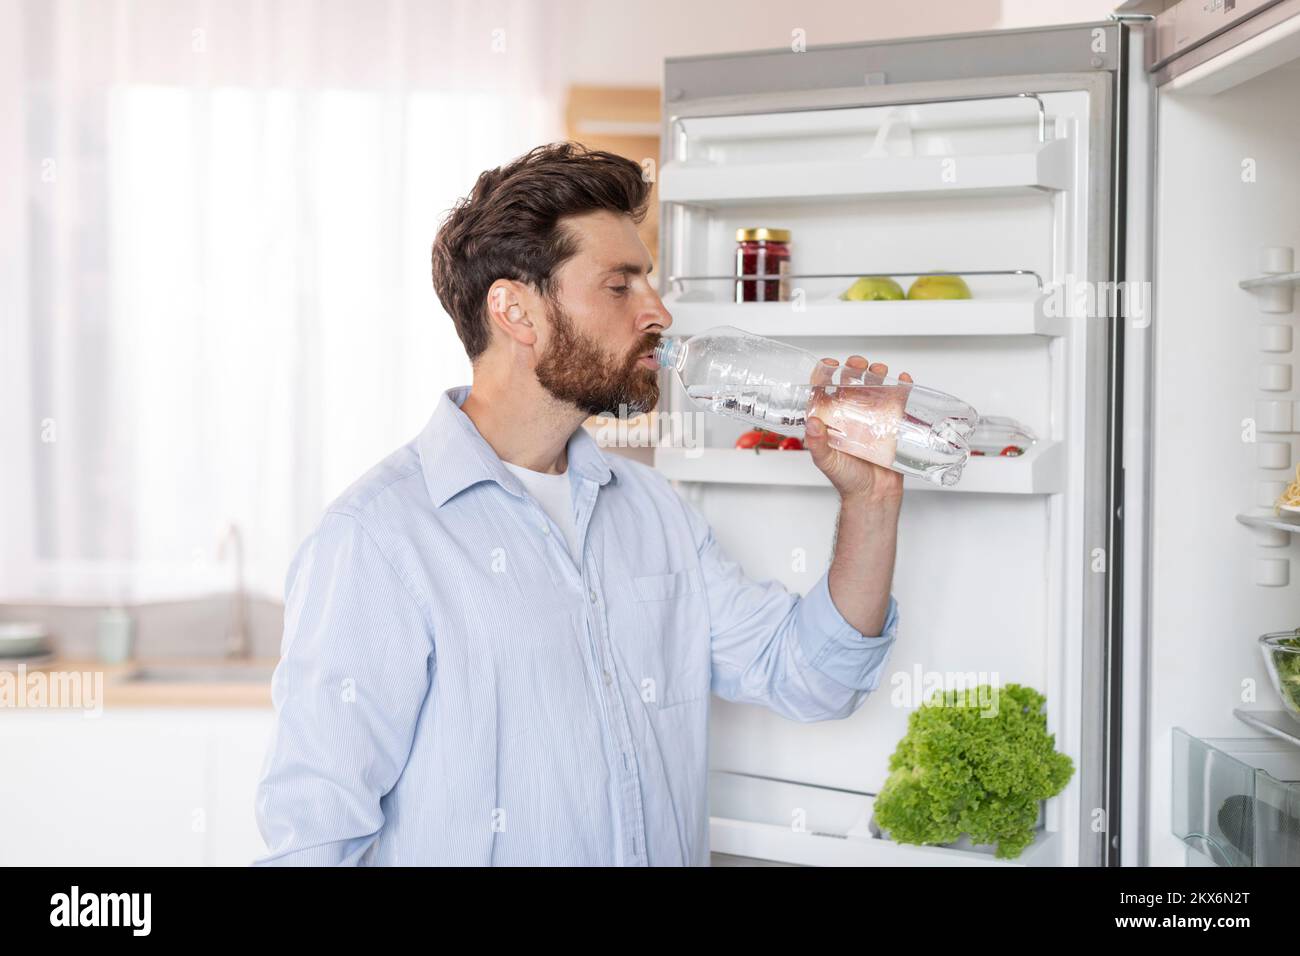 Adult thirst caucasian man with beard in white shirt opens refrigerator door, drinks water from bottle Stock Photo